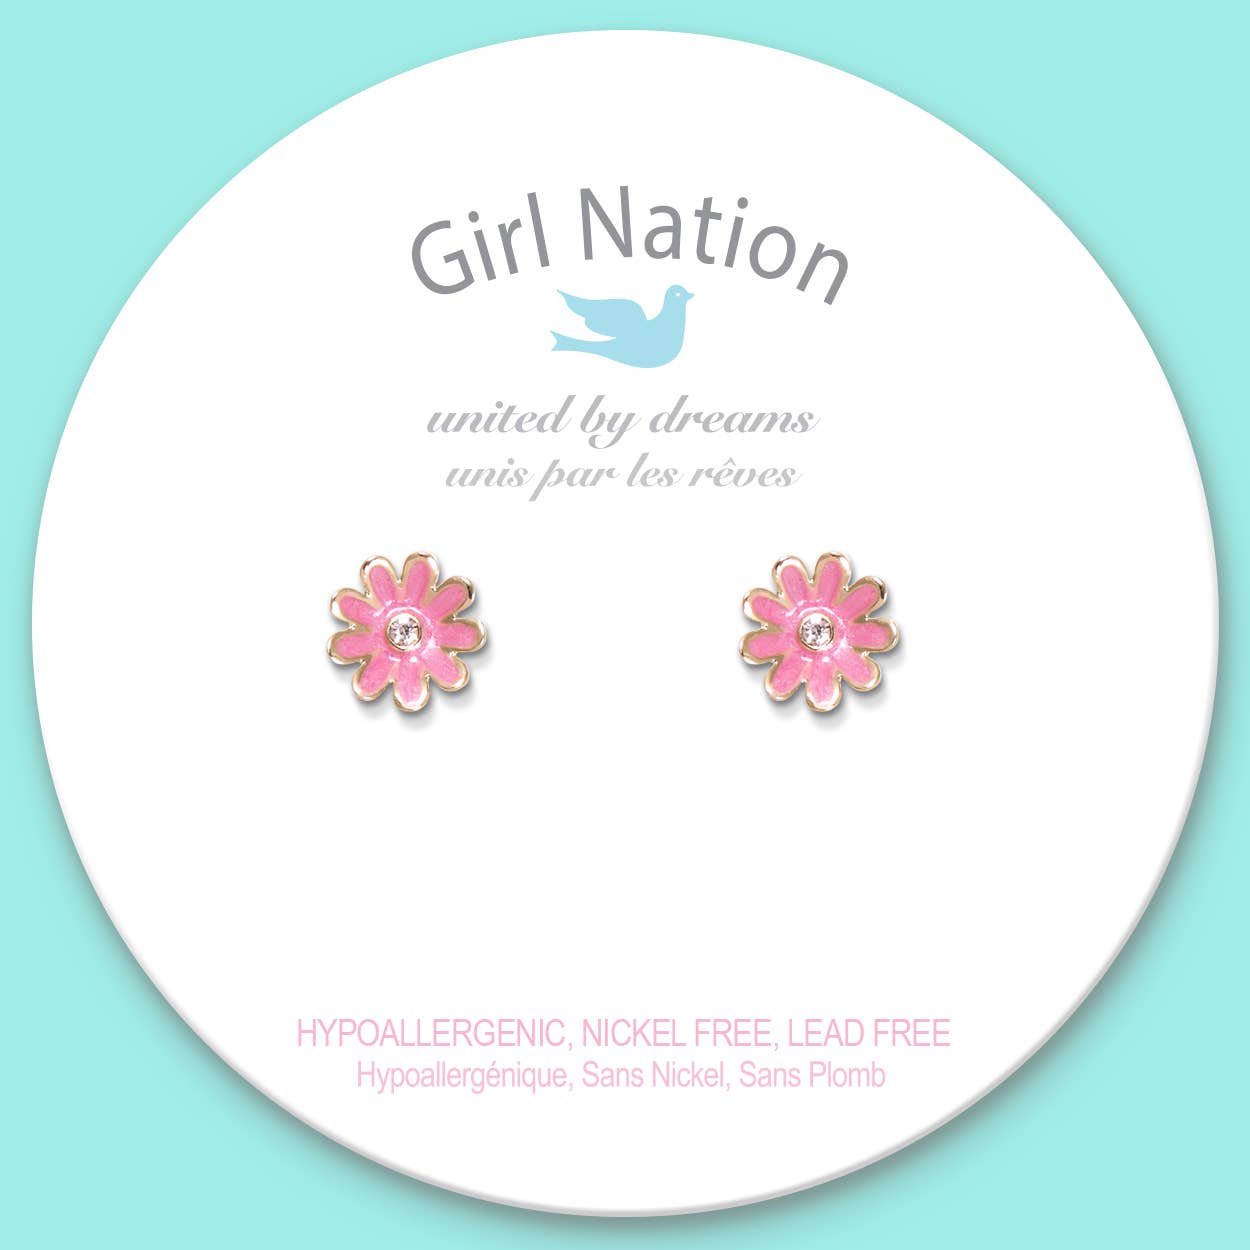 Pink Daisy Cutie Stud Earrings     - Chickie Collective